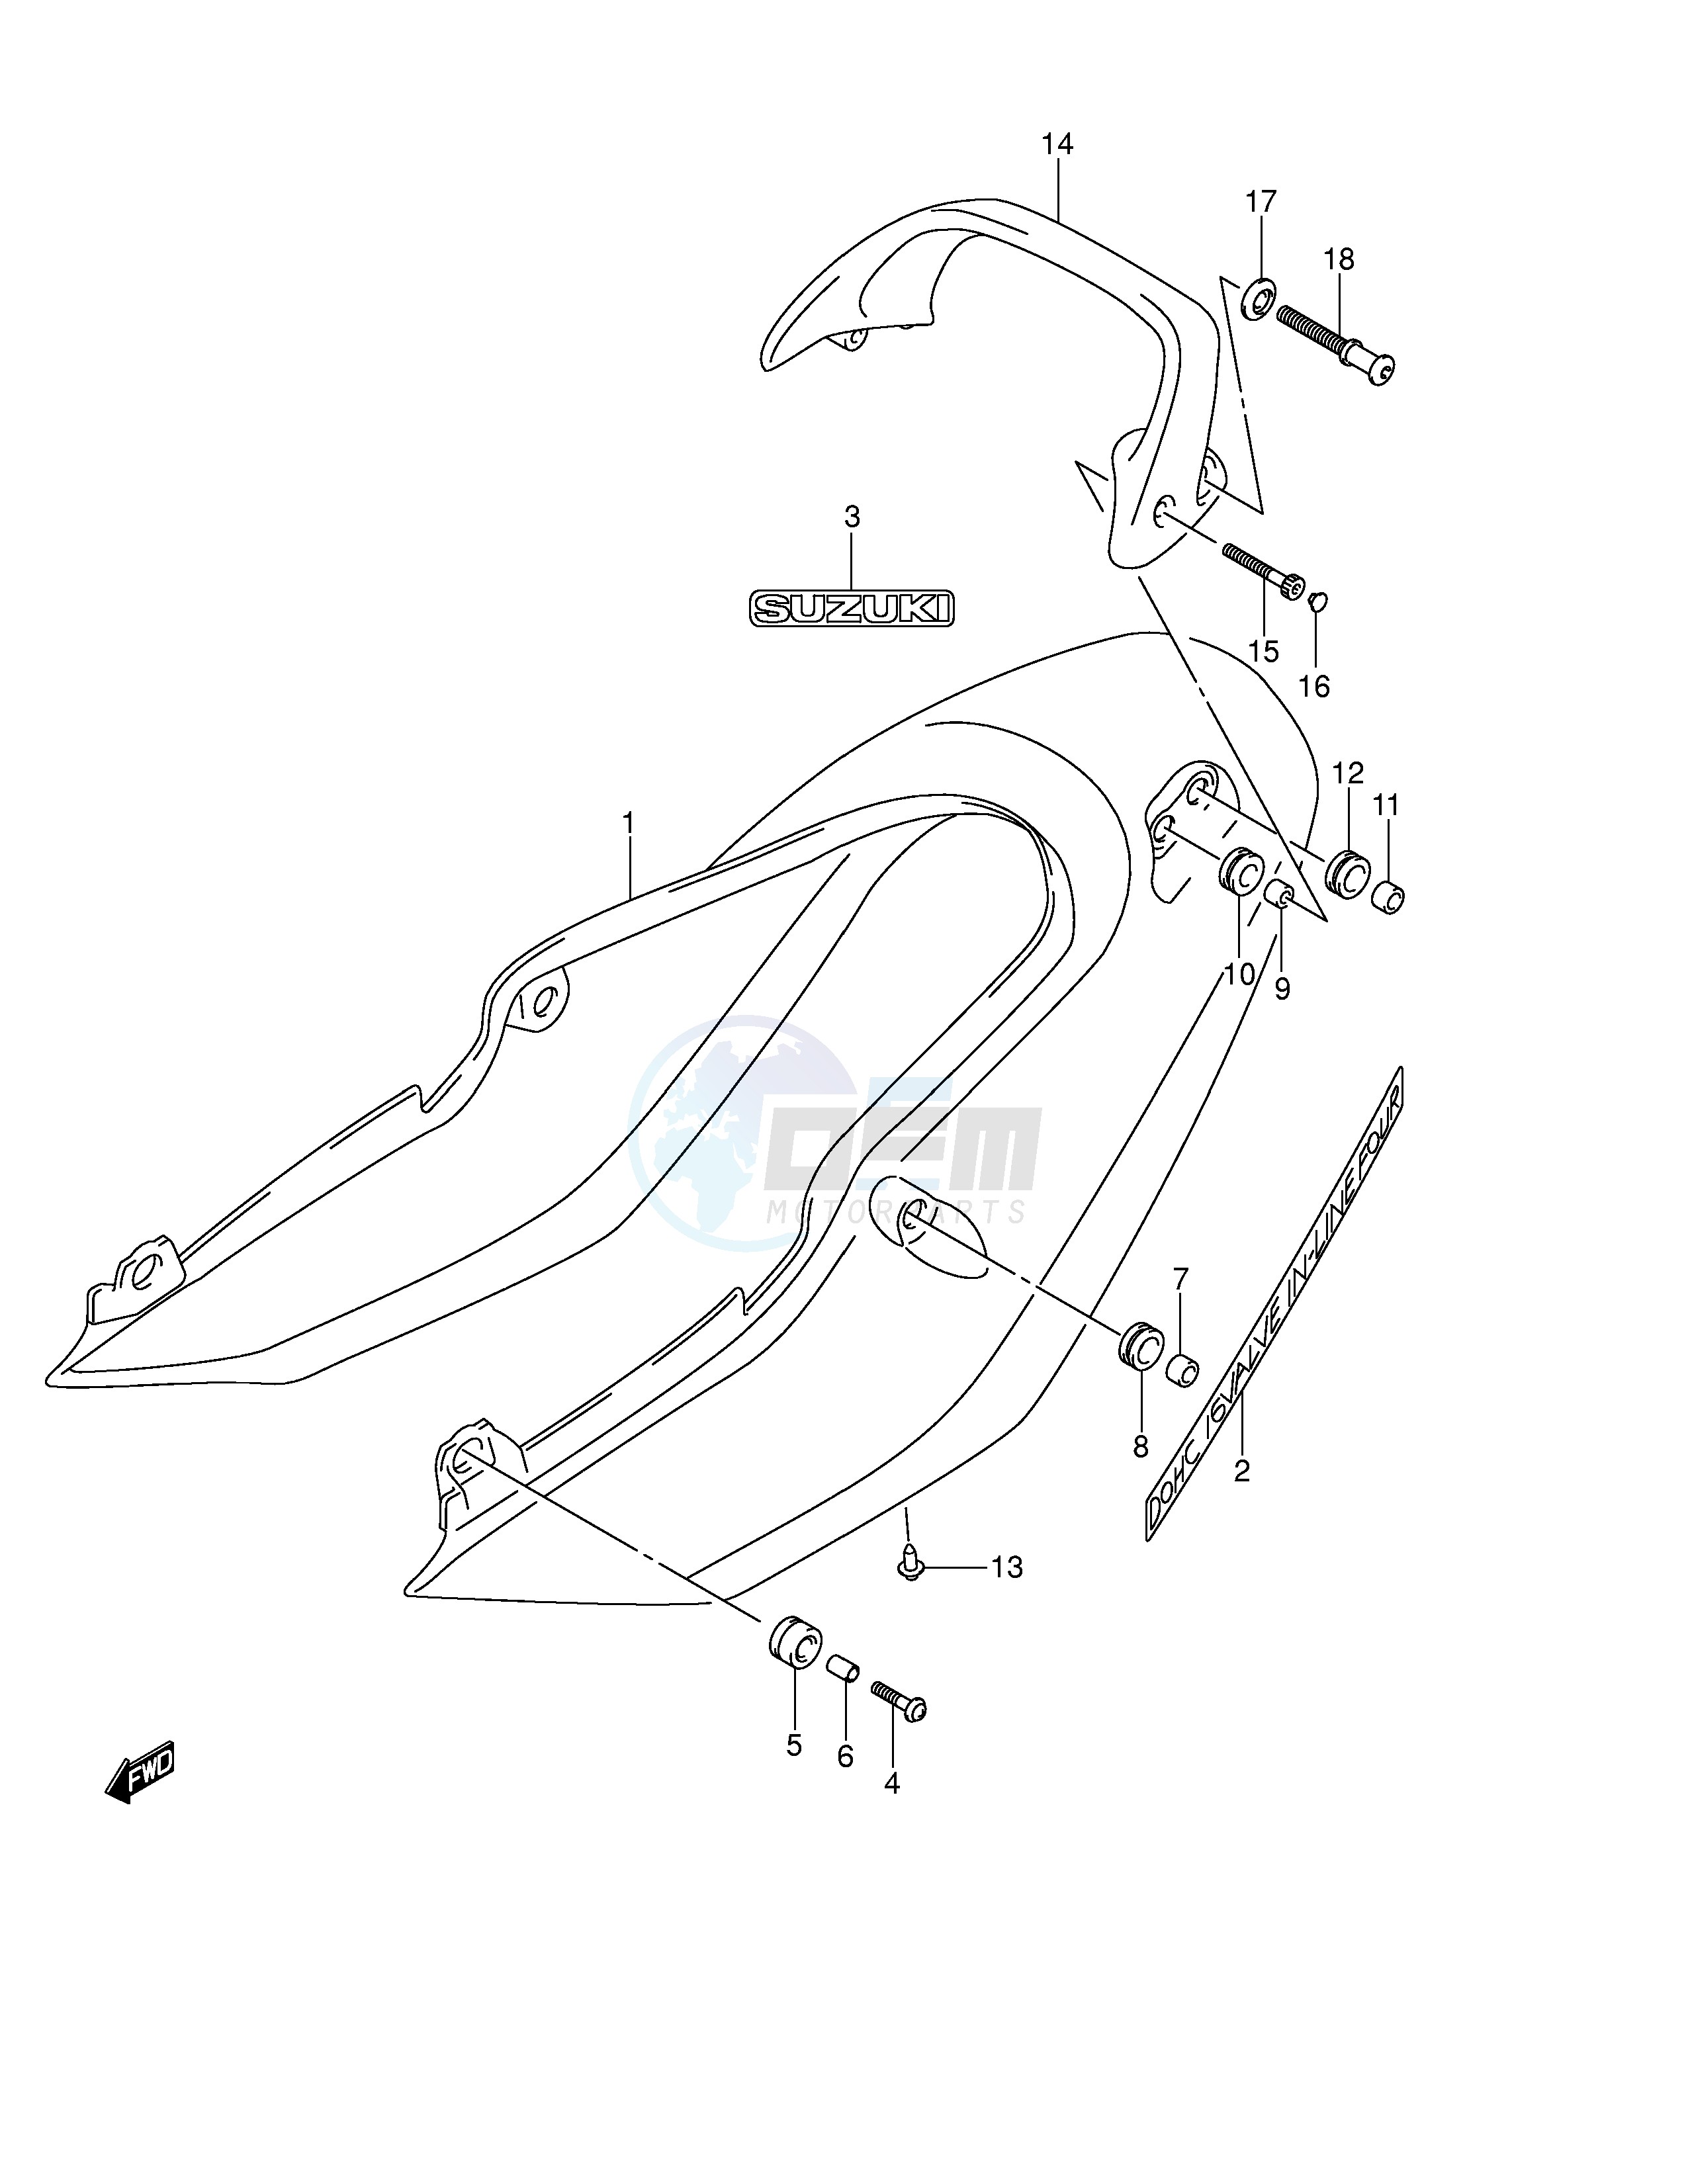 SEAT TAIL COVER (GSF1200SK4) blueprint